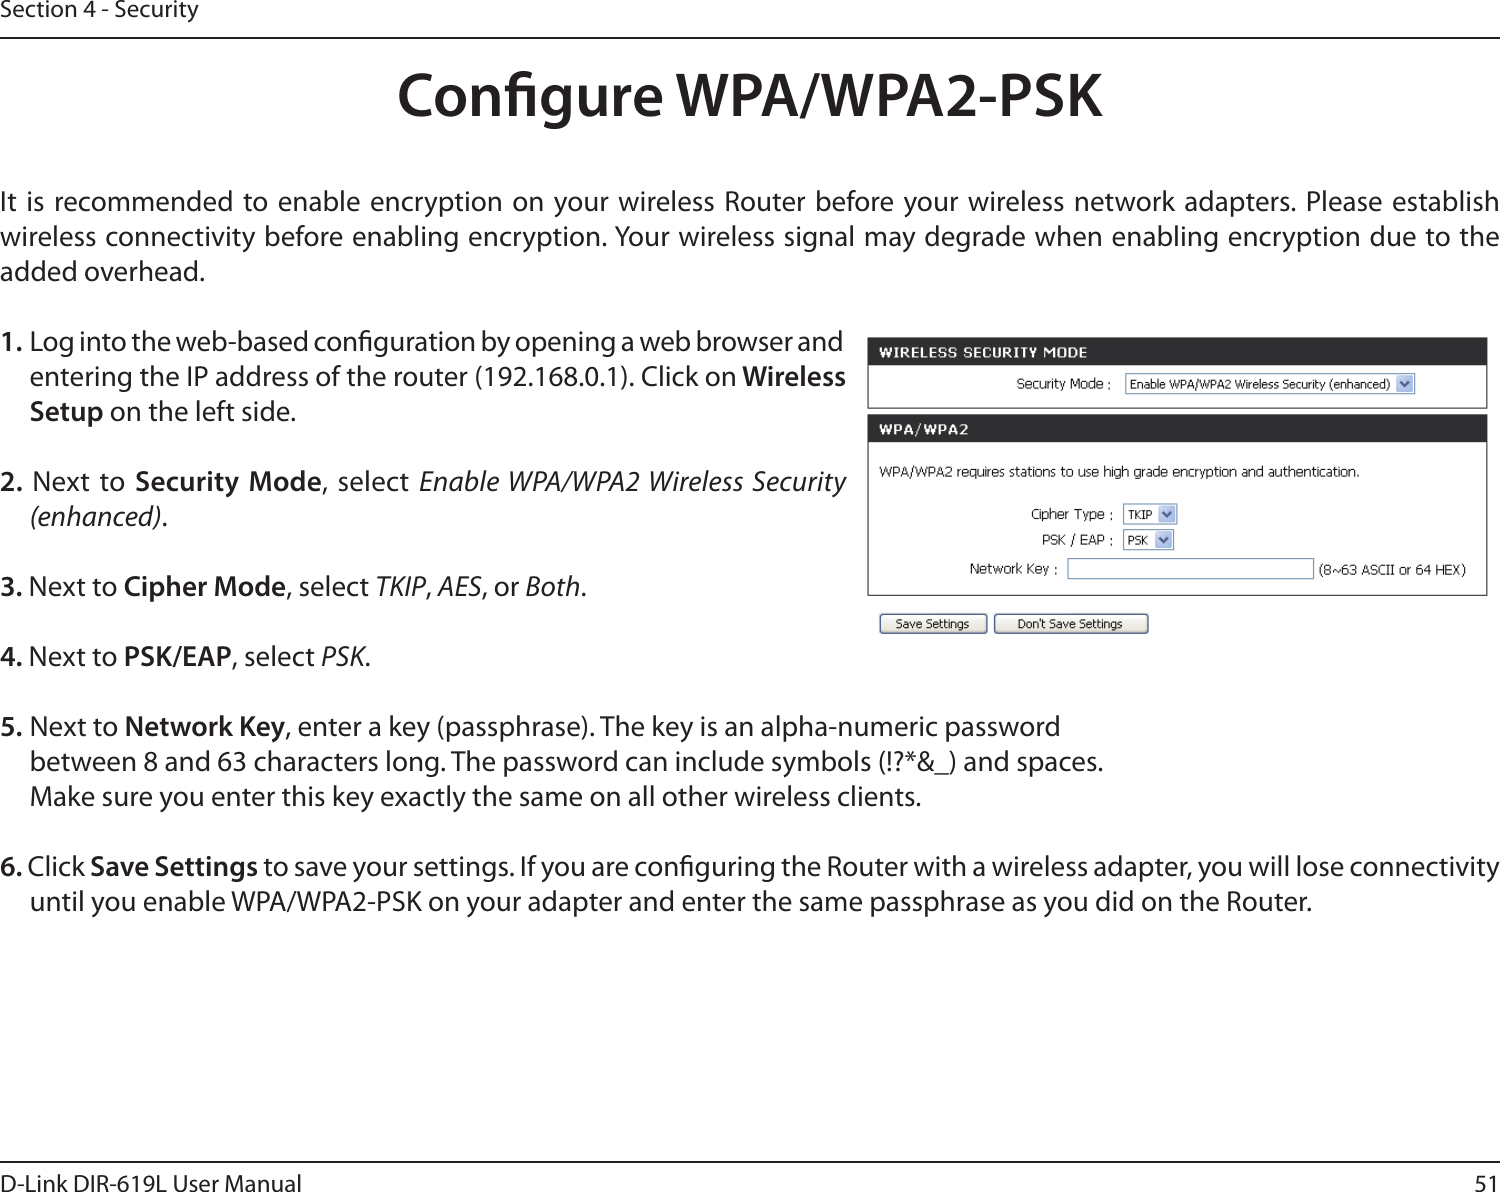 51D-Link DIR-619L User ManualSection 4 - SecurityCongure WPA/WPA2-PSKIt  is recommended to enable encryption  on your wireless  Router before your wireless network adapters. Please establish wireless connectivity before enabling encryption. Your wireless signal may degrade when enabling encryption due to the added overhead.1. Log into the web-based conguration by opening a web browser and entering the IP address of the router (192.168.0.1). Click on Wireless Setup on the left side.2. Next to Security Mode, select Enable WPA/WPA2 Wireless Security (enhanced).3. Next to Cipher Mode, select TKIP, AES, or Both.4. Next to PSK/EAP, select PSK.5. Next to Network Key, enter a key (passphrase). The key is an alpha-numeric passwordbetween 8 and 63 characters long. The password can include symbols (!?*&amp;_) and spaces. Make sure you enter this key exactly the same on all other wireless clients.6. Click Save Settings to save your settings. If you are conguring the Router with a wireless adapter, you will lose connectivity until you enable WPA/WPA2-PSK on your adapter and enter the same passphrase as you did on the Router.